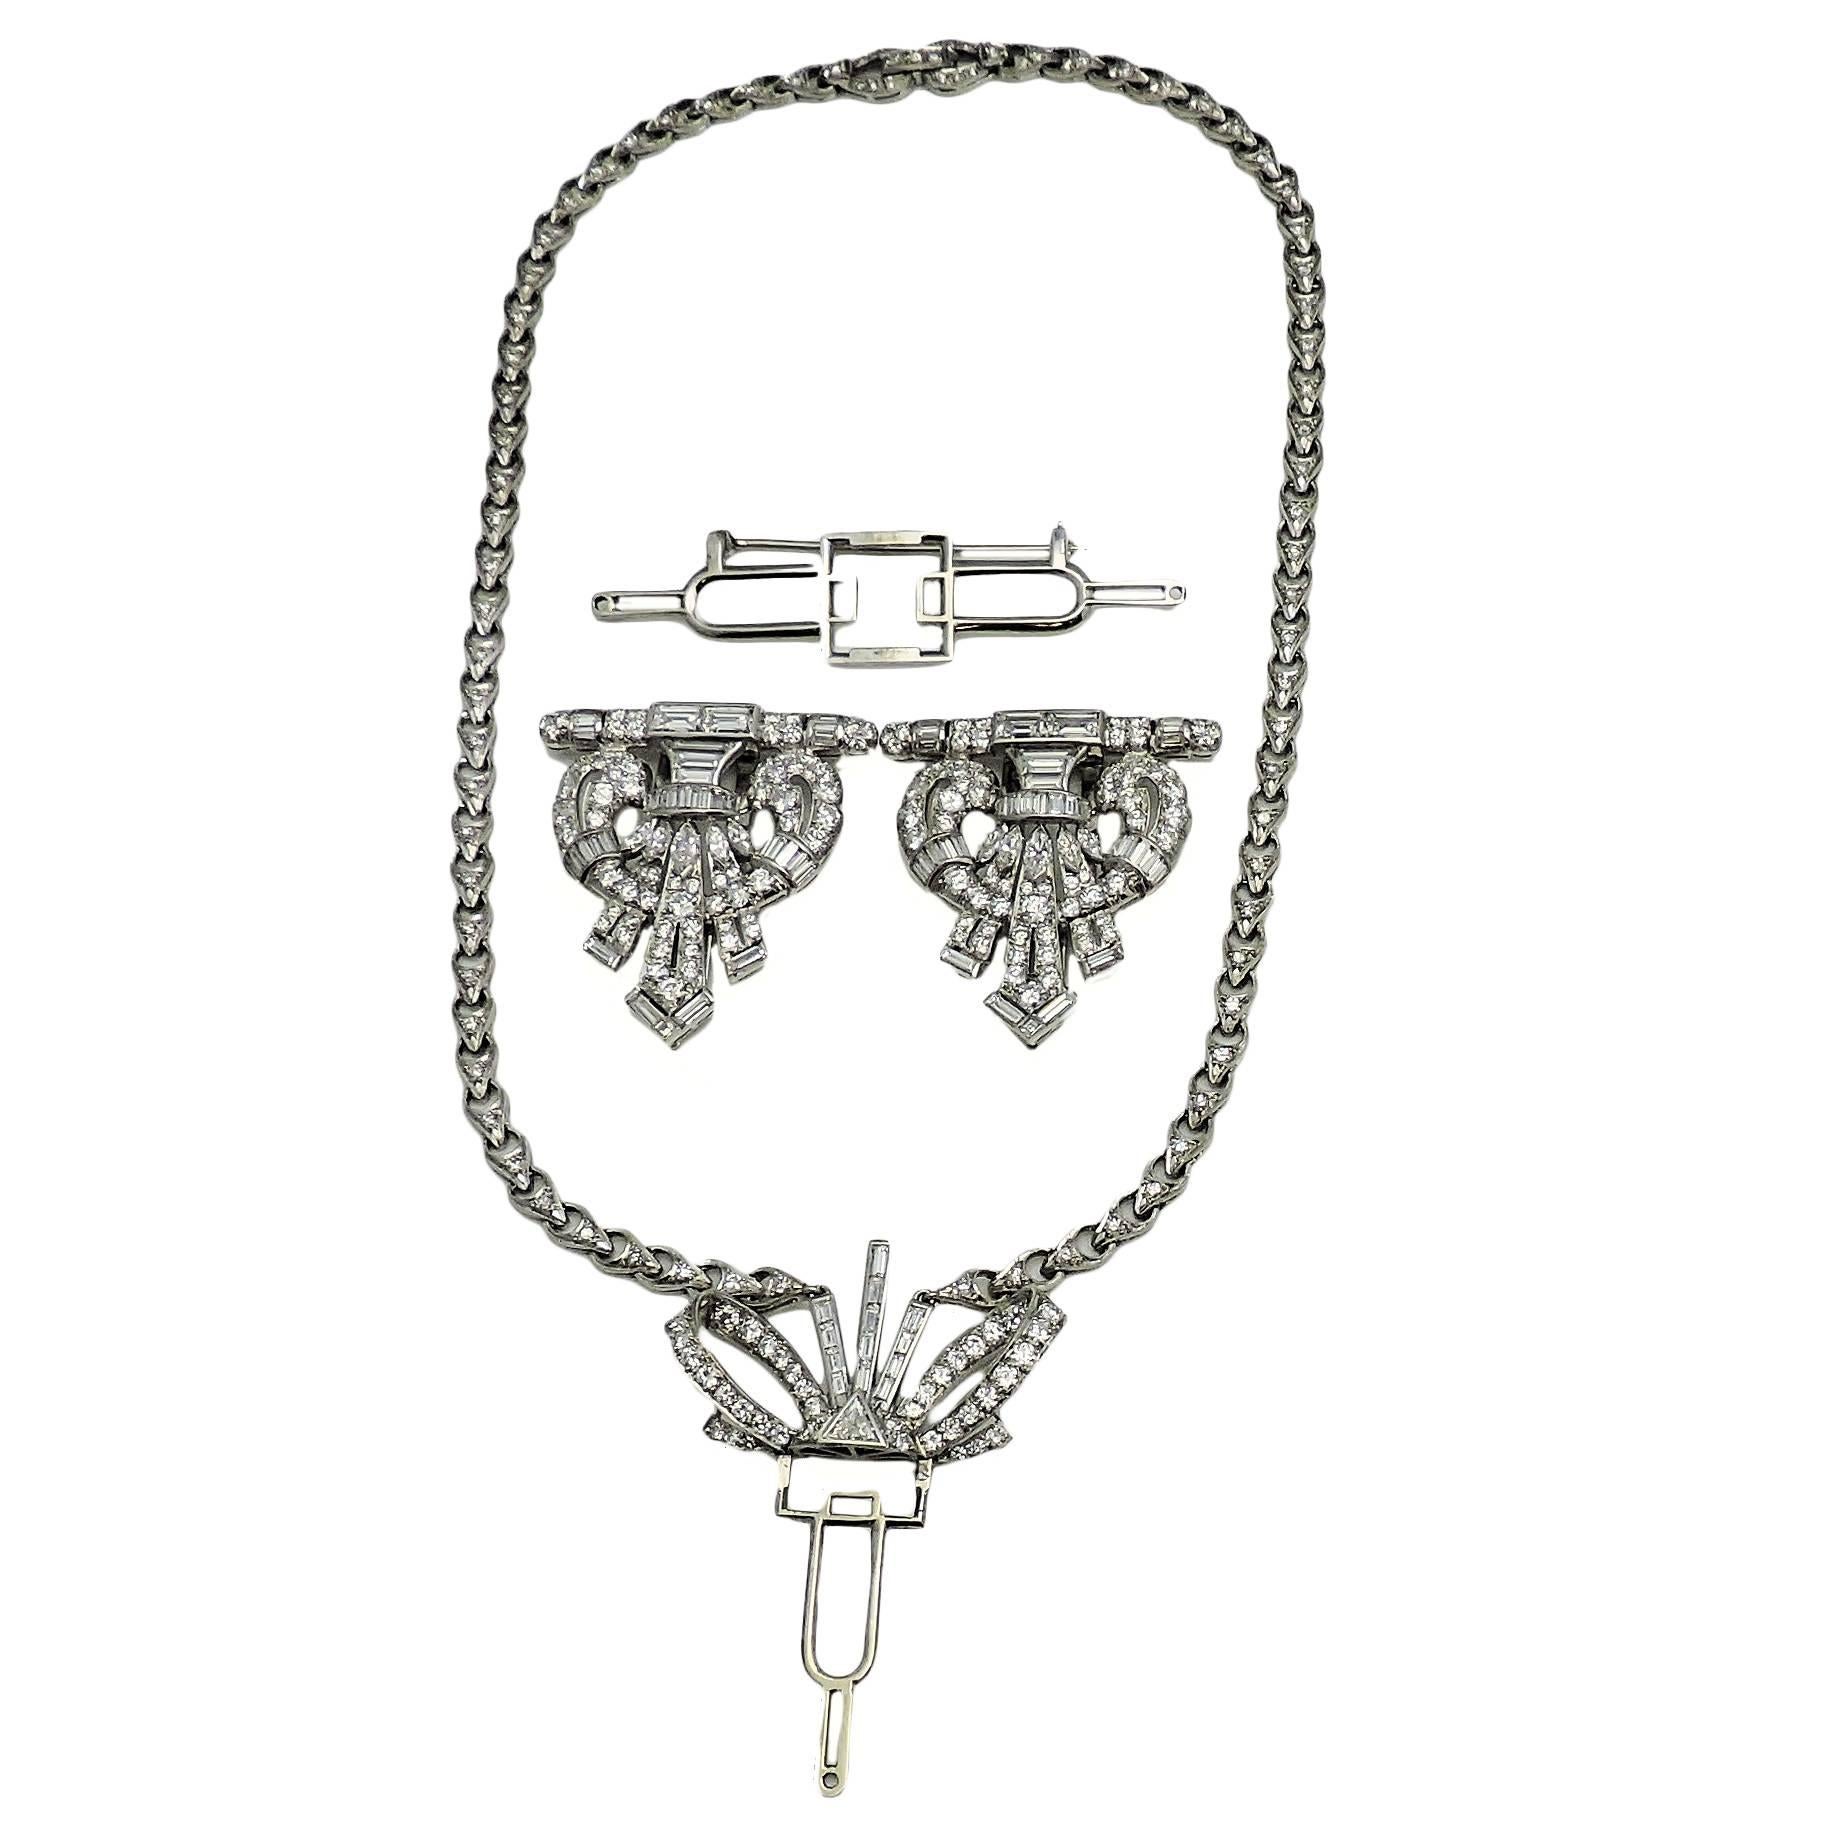 Set with diamonds throughout, this versatile authentic Art Deco period piece converts from brooch to matching dress clips to necklace with quick movements.  Contains 286 round, 80 baguette, 10 marquise, and one triangle cut diamonds with a combined